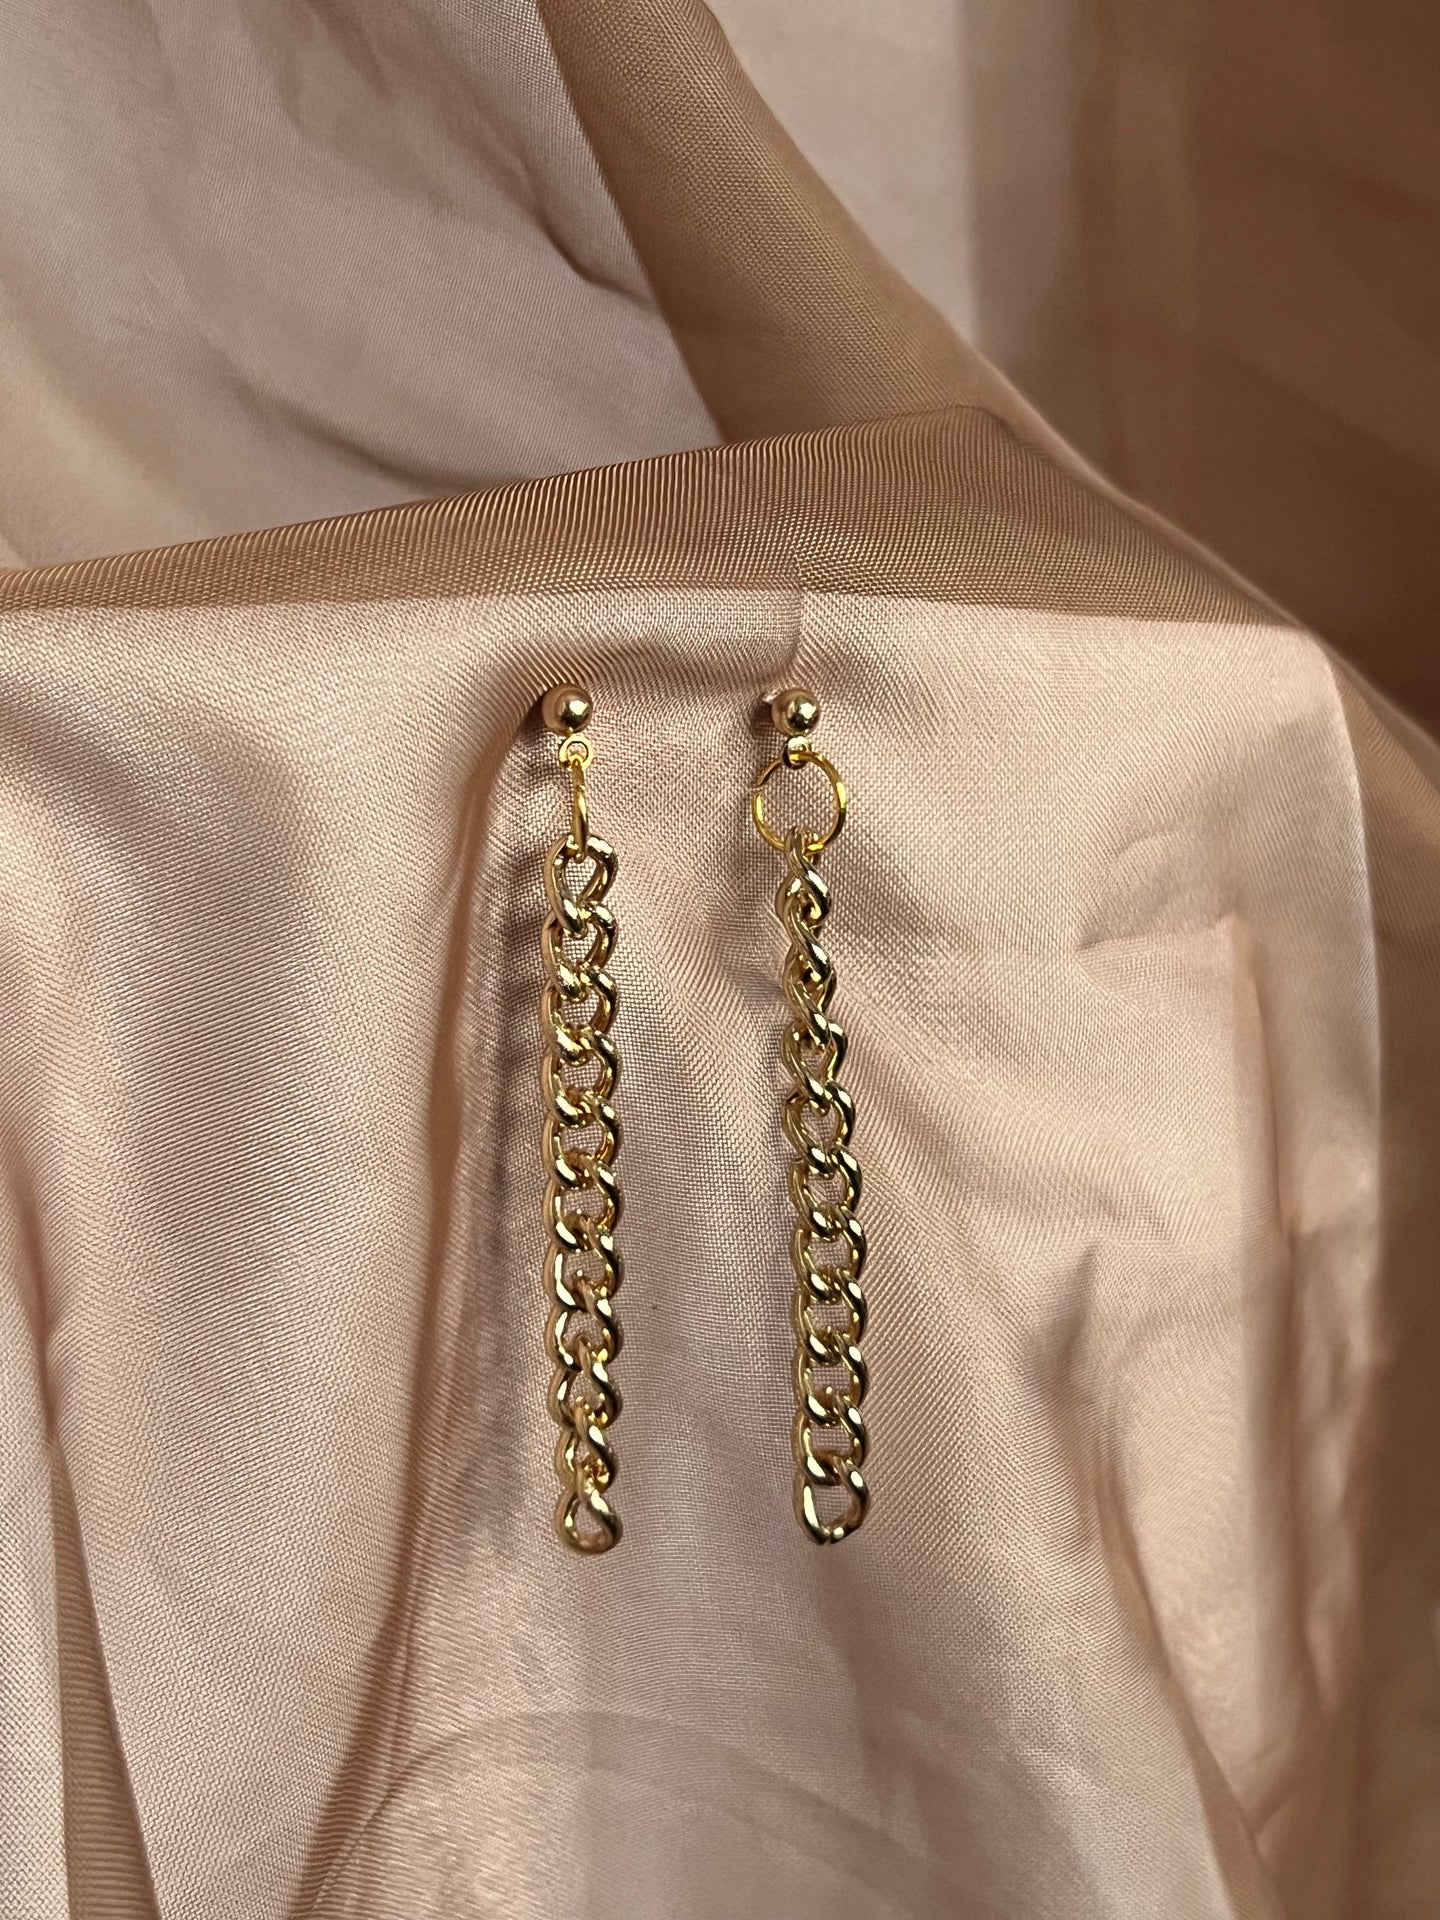 Gold Chain Earrings | Coordinate Picture Frame